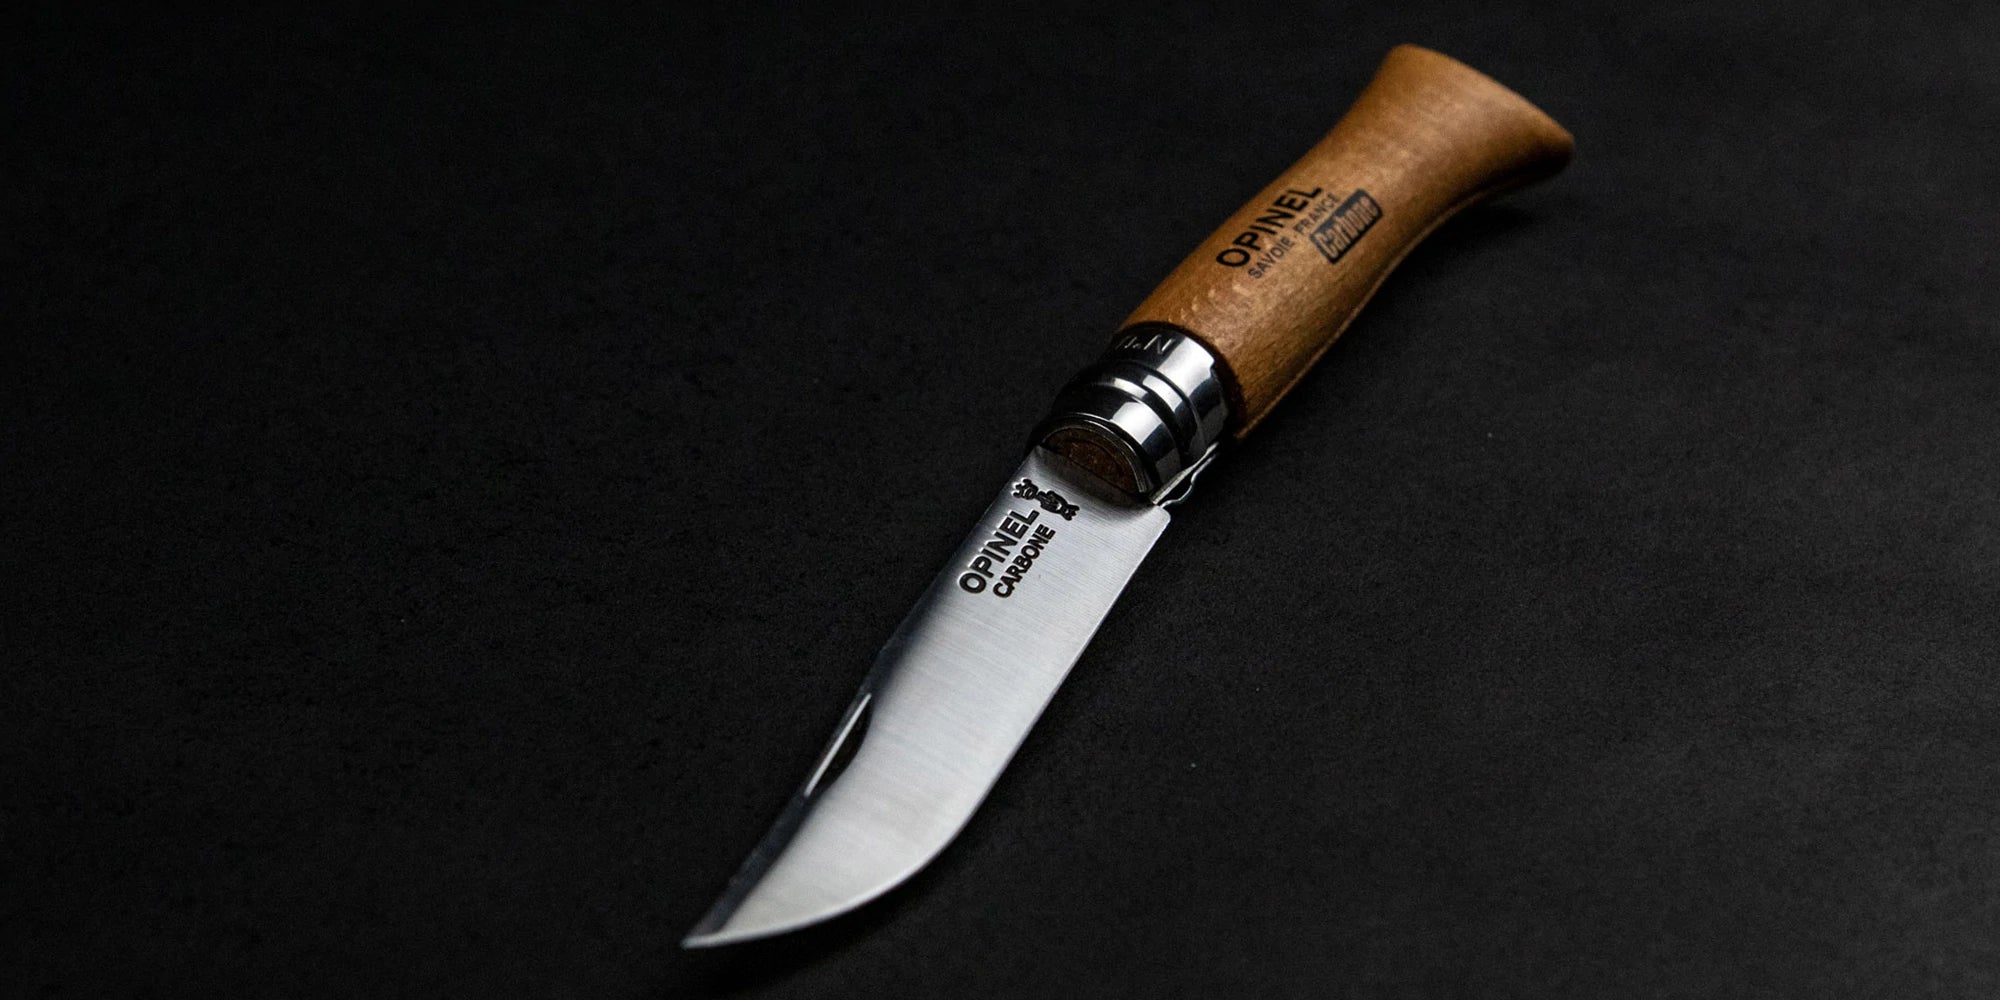 No. 7 Opinel Carbon Knife OP-13070 measures 4 inches when closed.